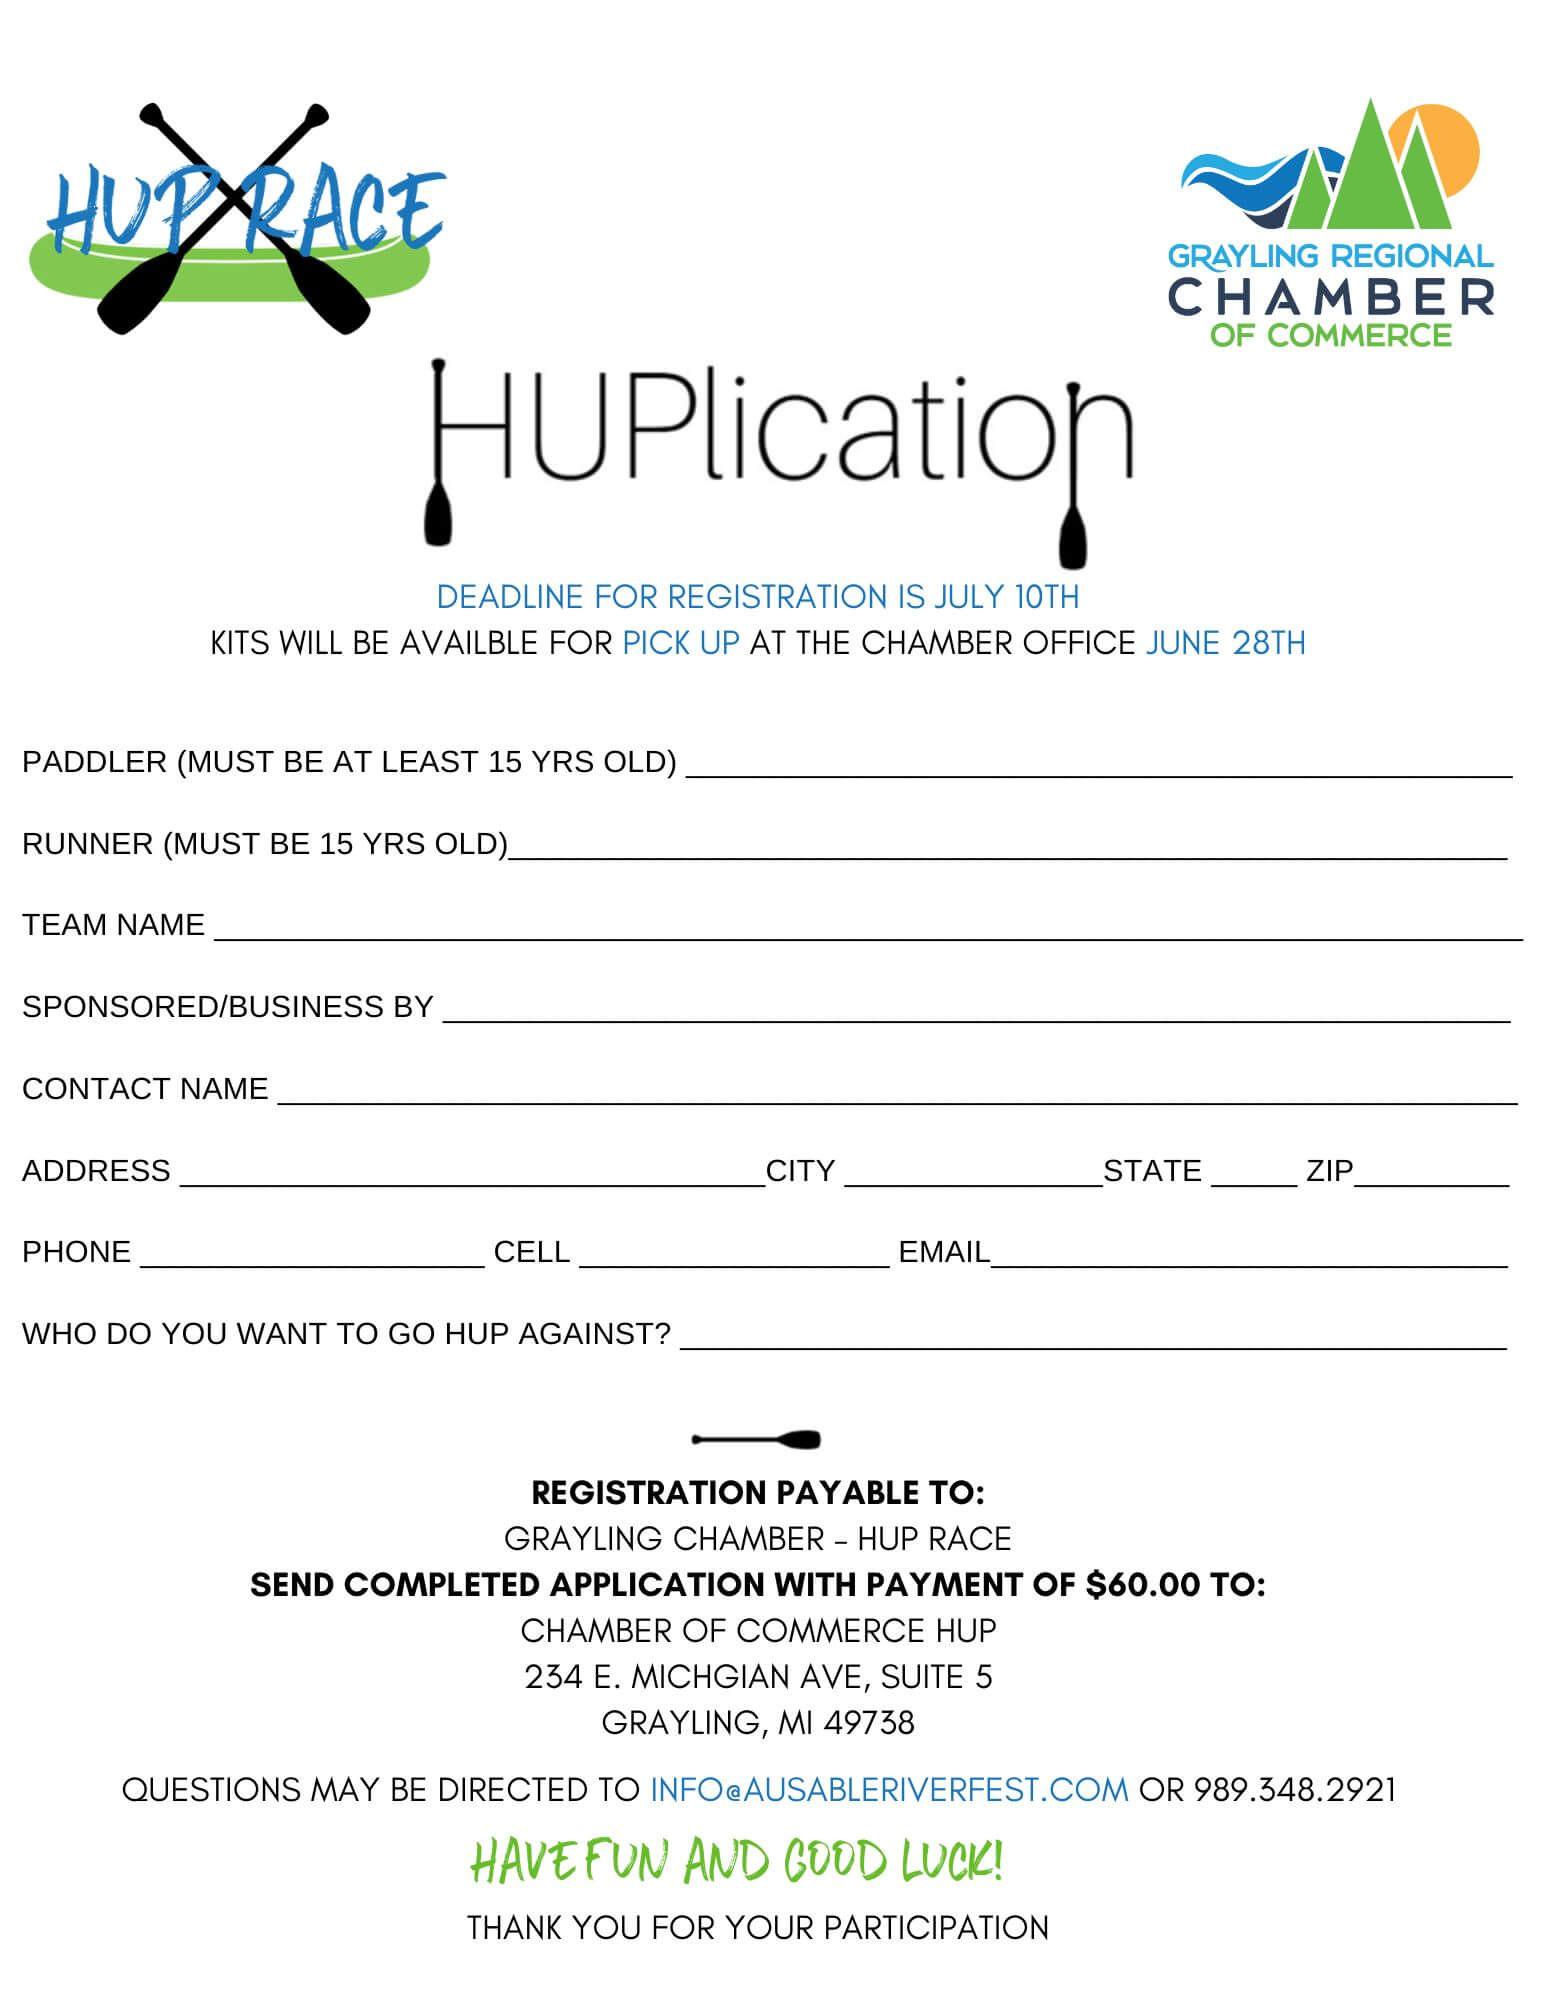 hup race sign up